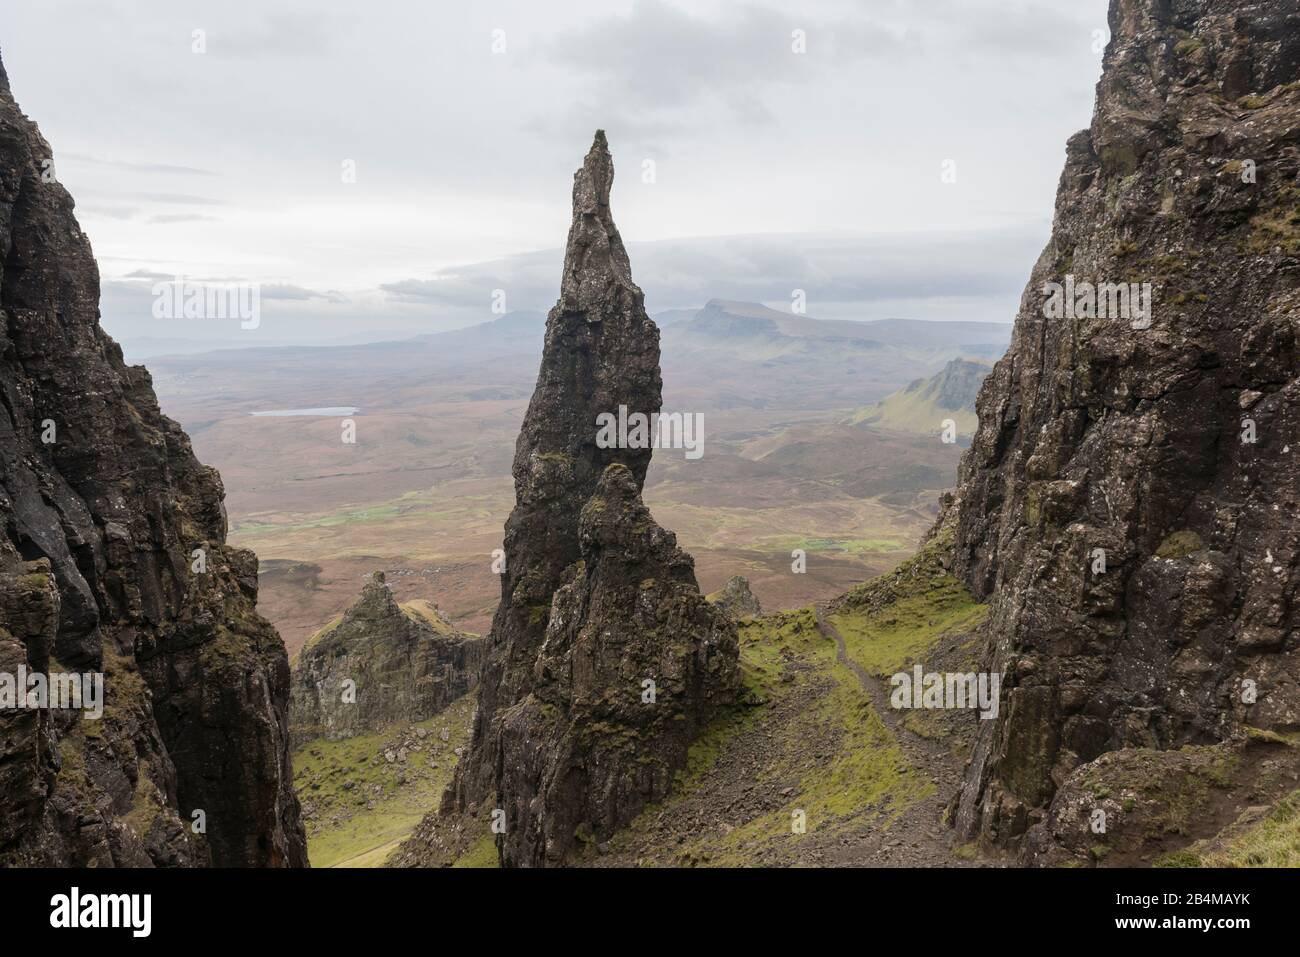 Great Britain, Scotland, Inner Hebrides, Isle of Skye, Trotternish, Quiraing, rocky landscape with The Needle Stock Photo